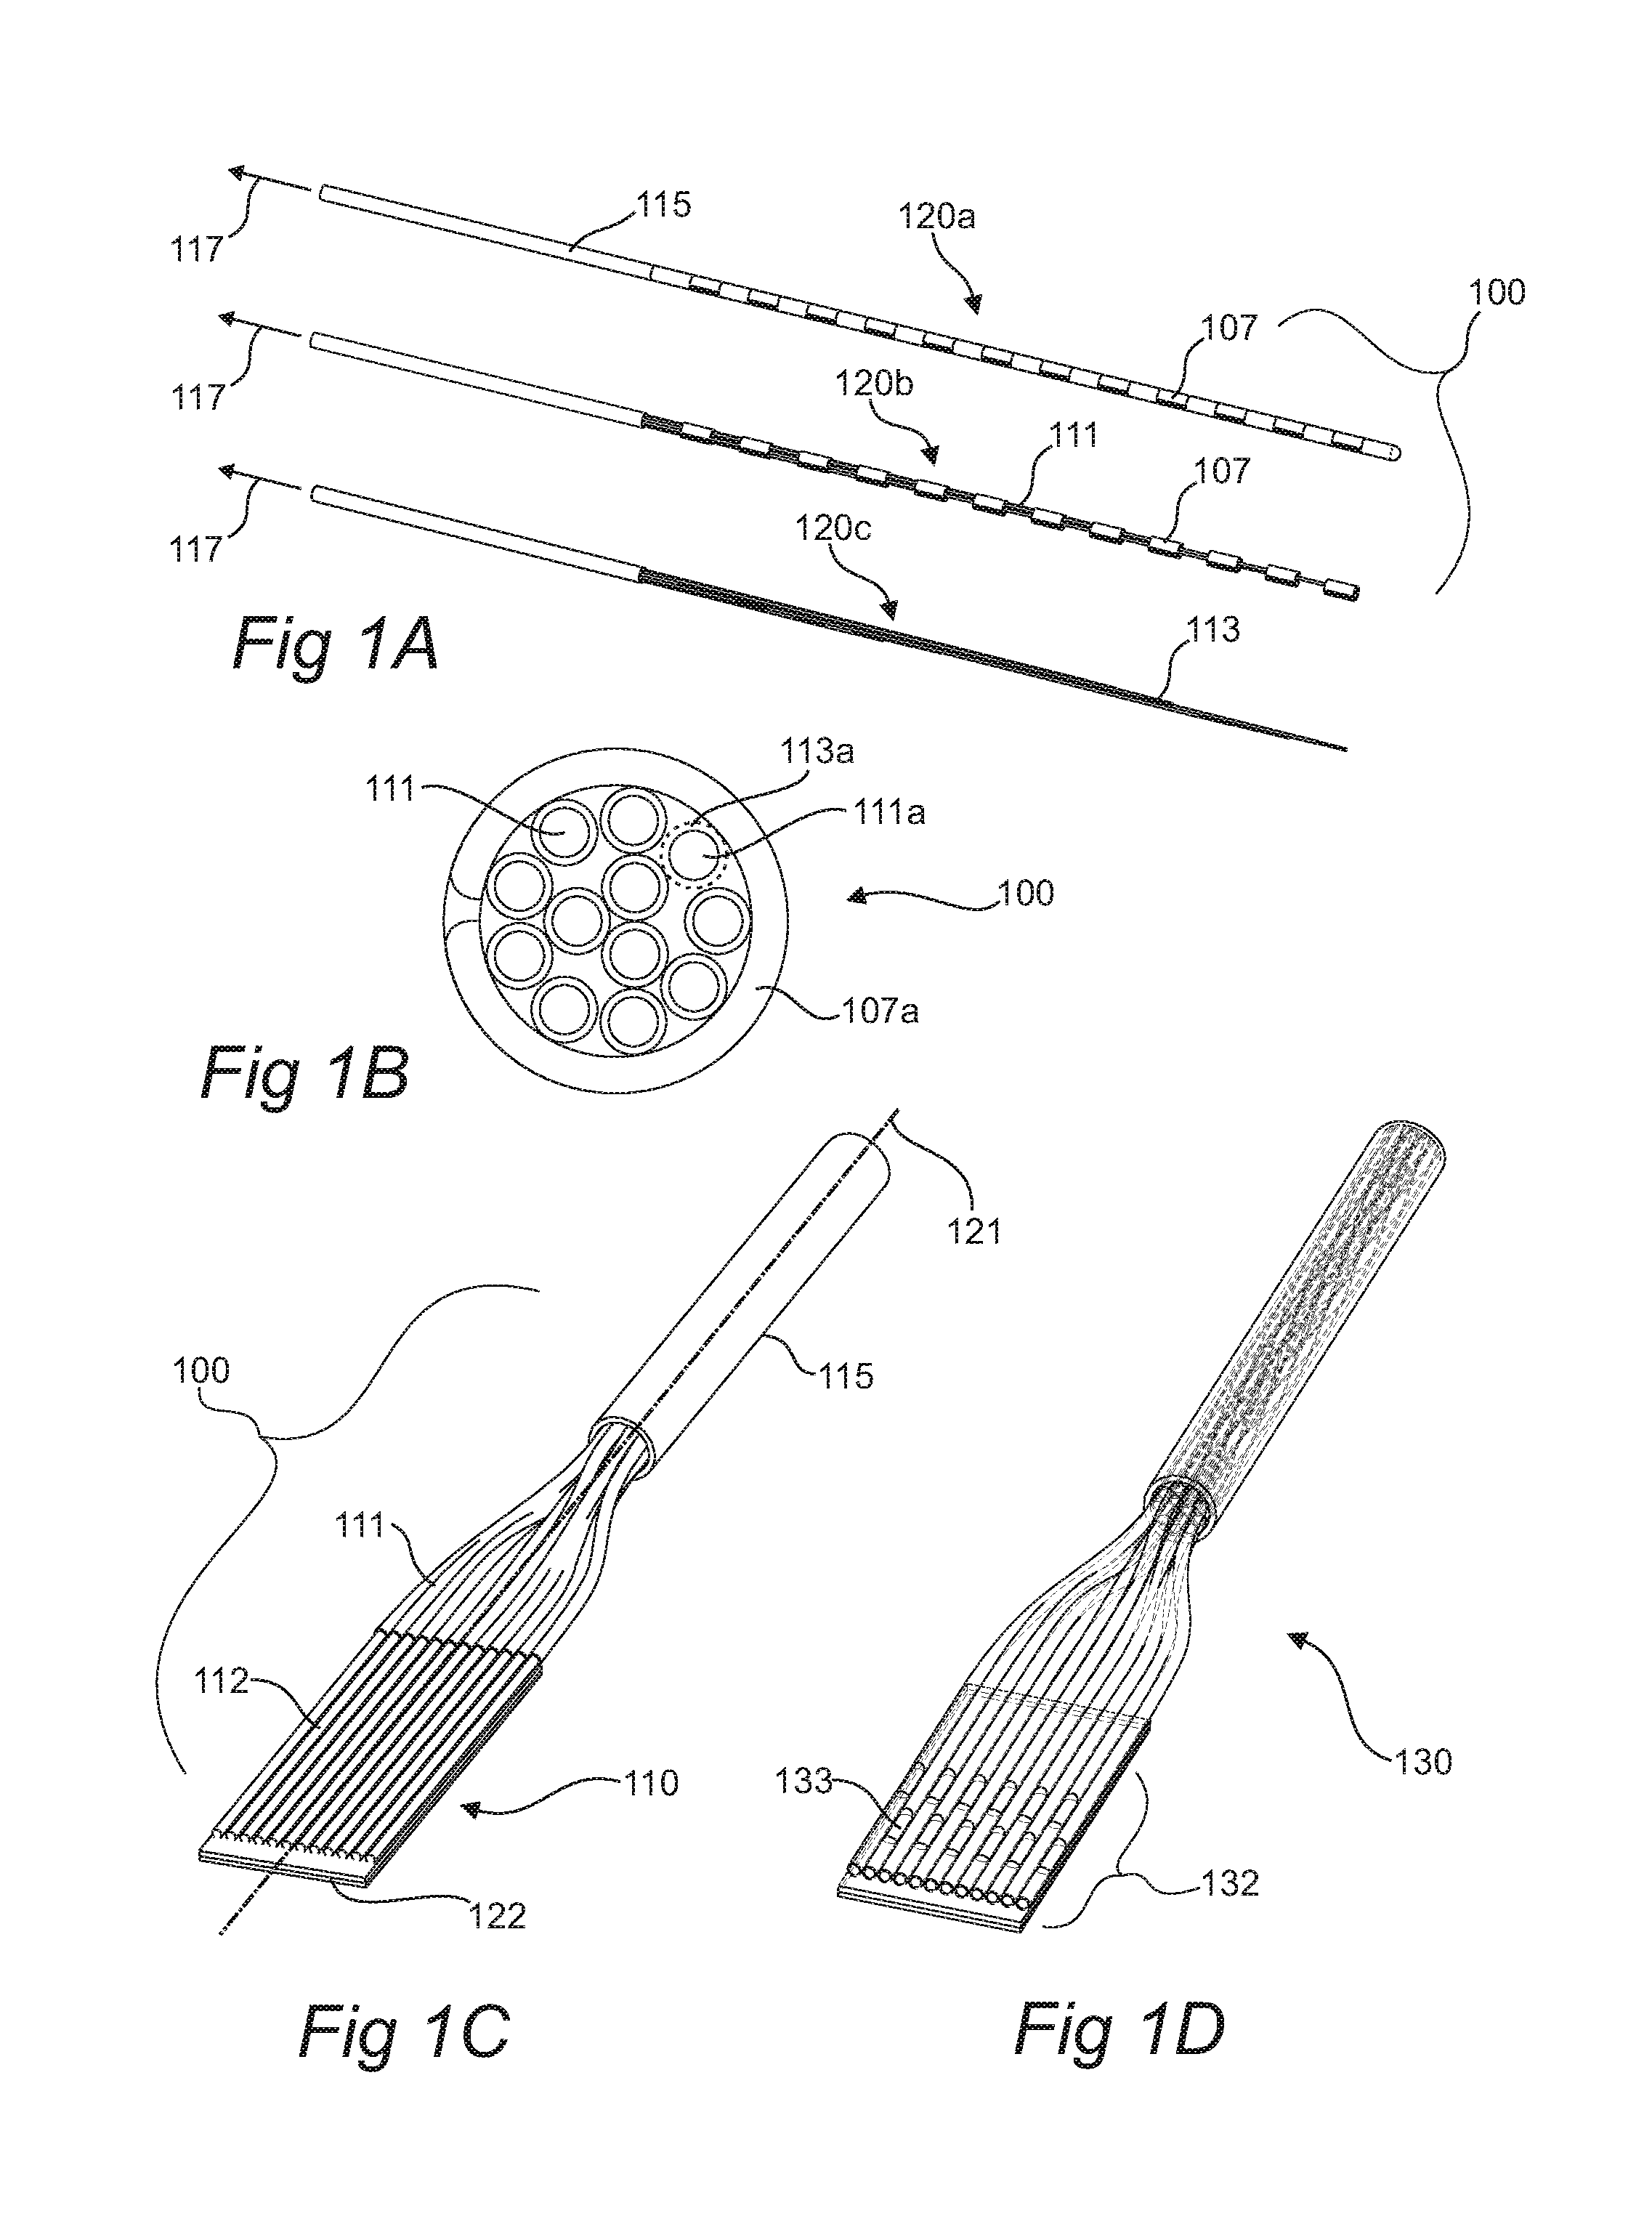 Elongated Conductors and Methods of Making and Using the Same